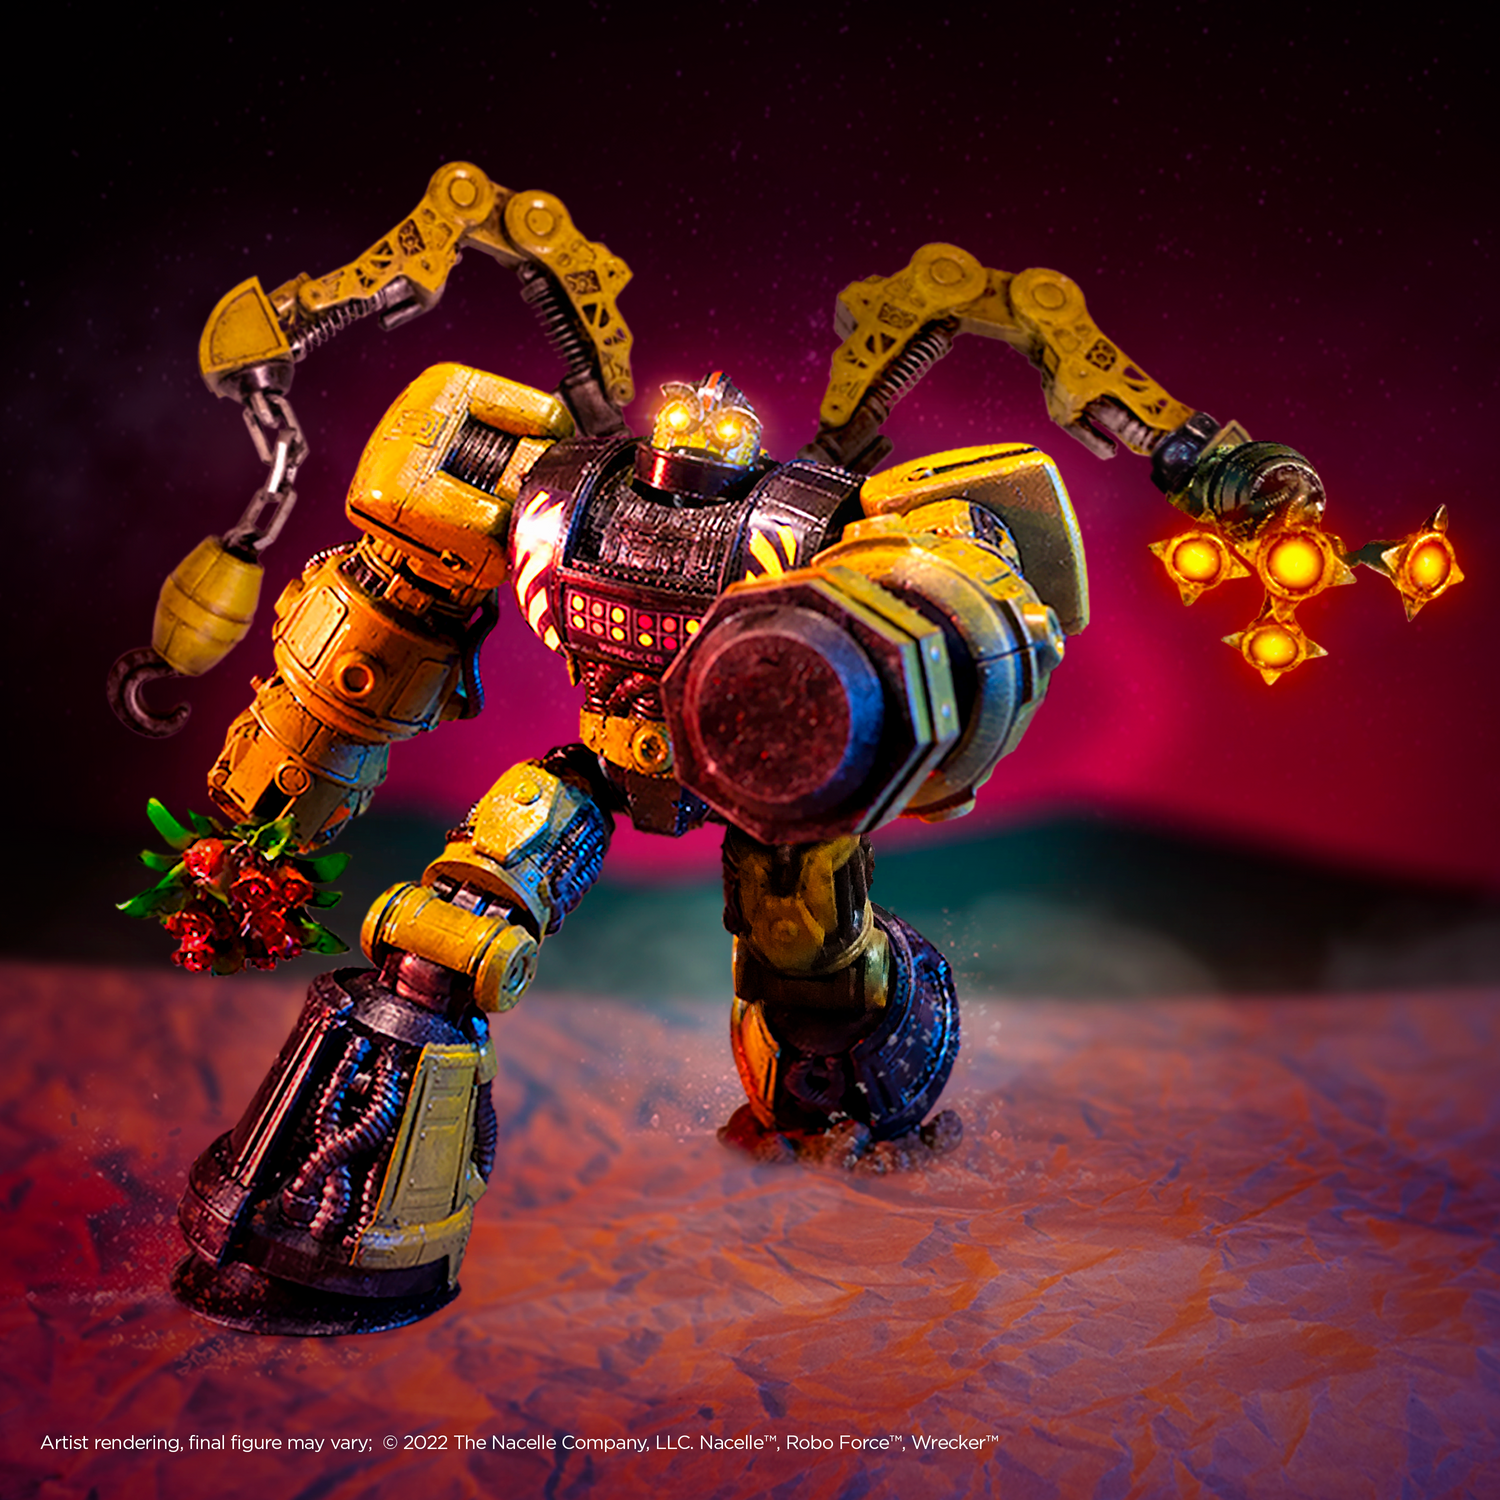 Wrecker collectible figure from Robo Force artist rendering